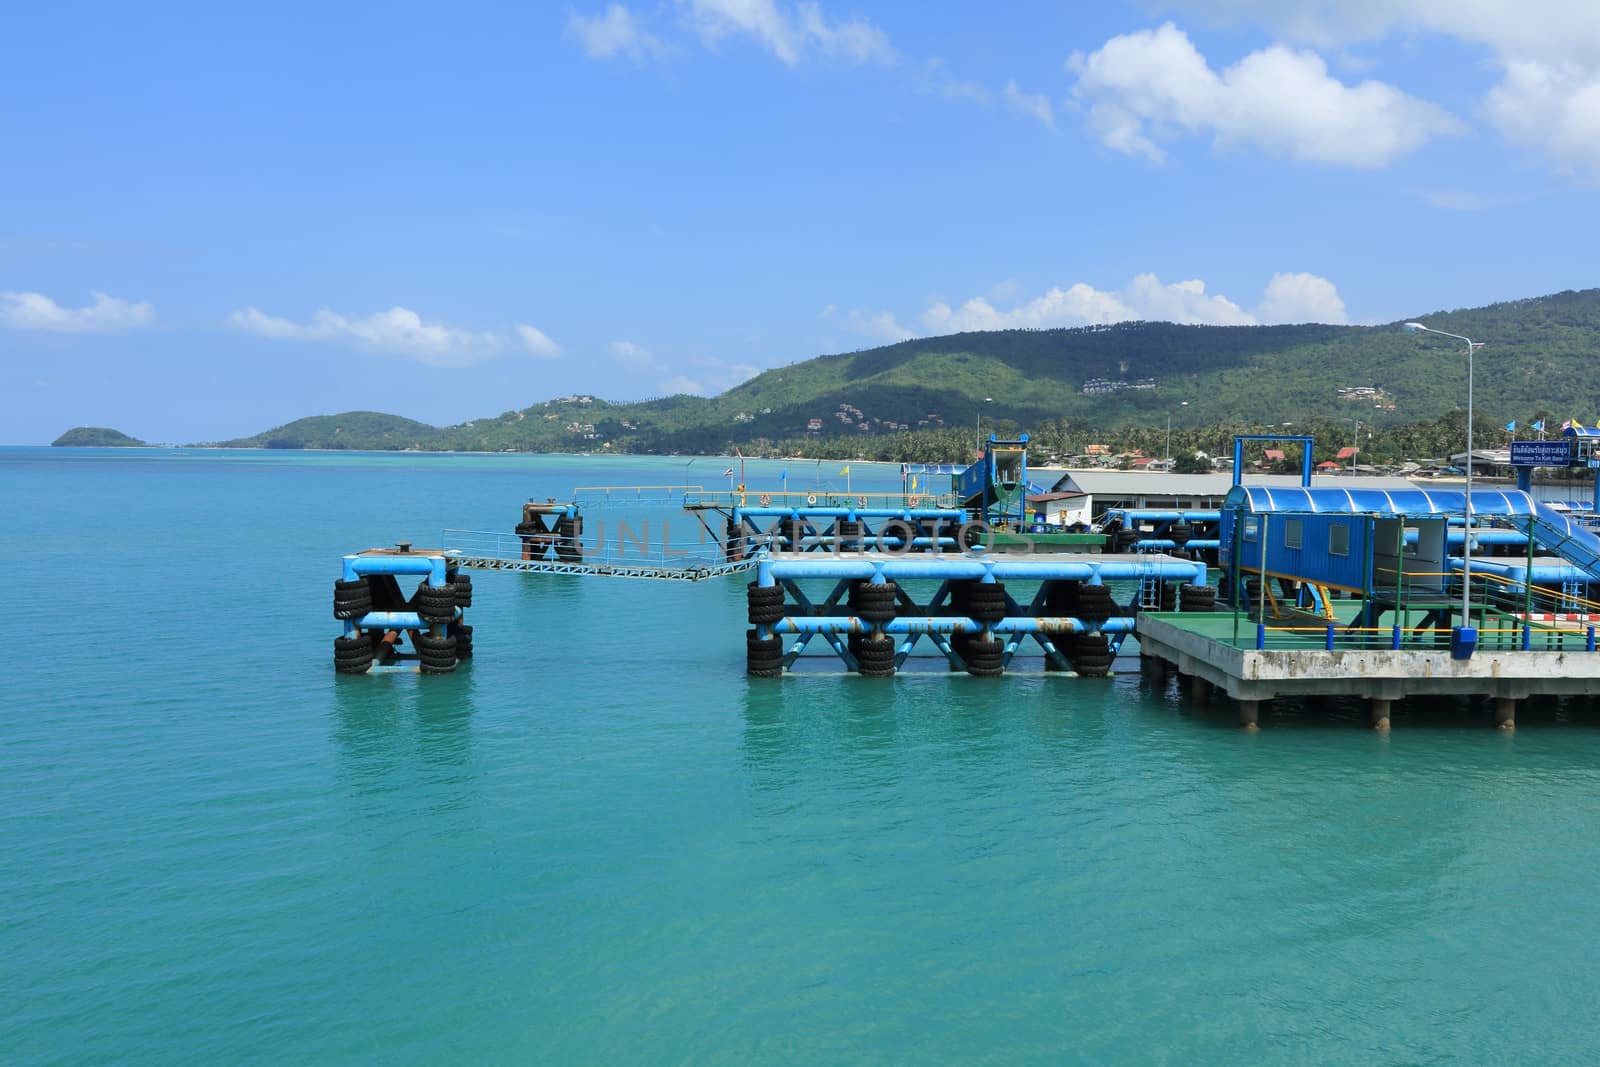 Harbour of ferry boat, Samui Island, Thailand